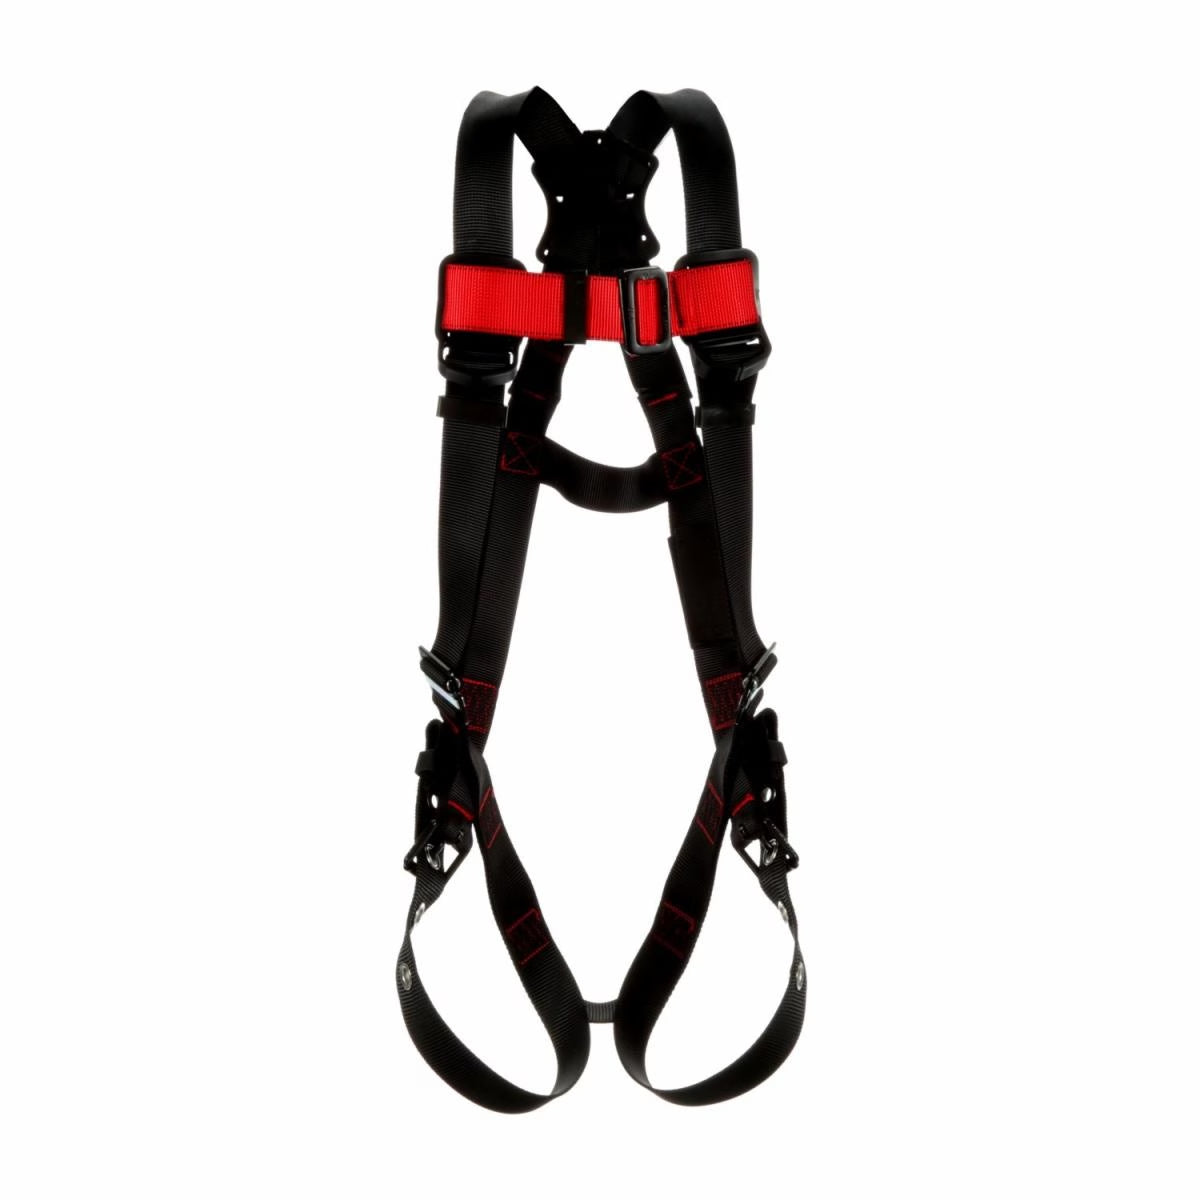 3M Protecta vest style harness